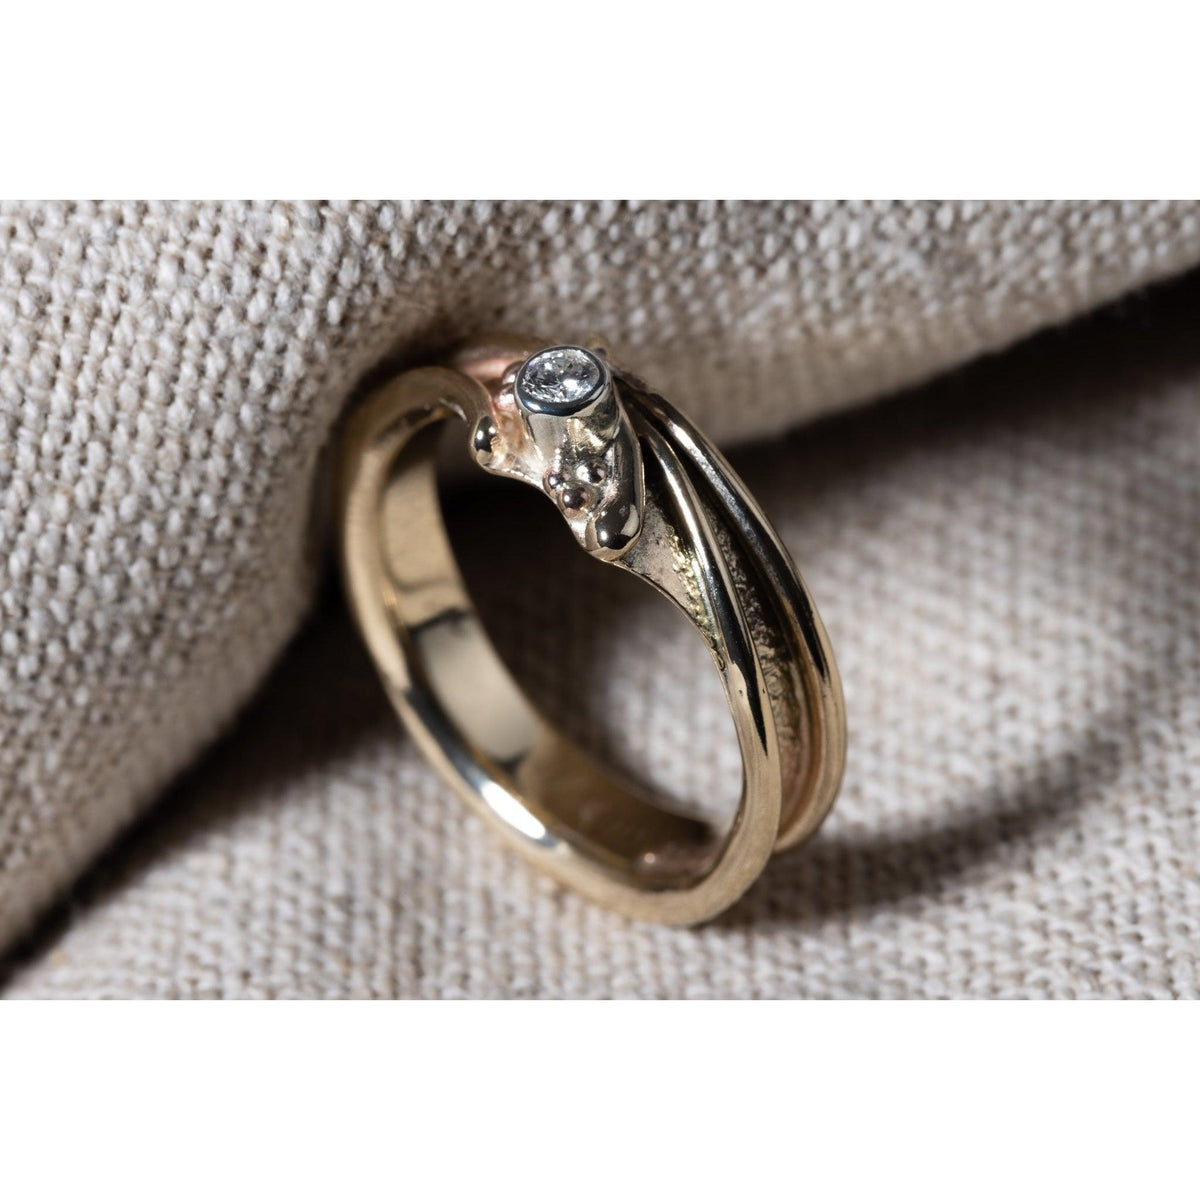 &#39;LG23 9ct Gold &amp; Diamond Ring&#39; by Les Grimshaw, available at Padstow Gallery, Cornwall